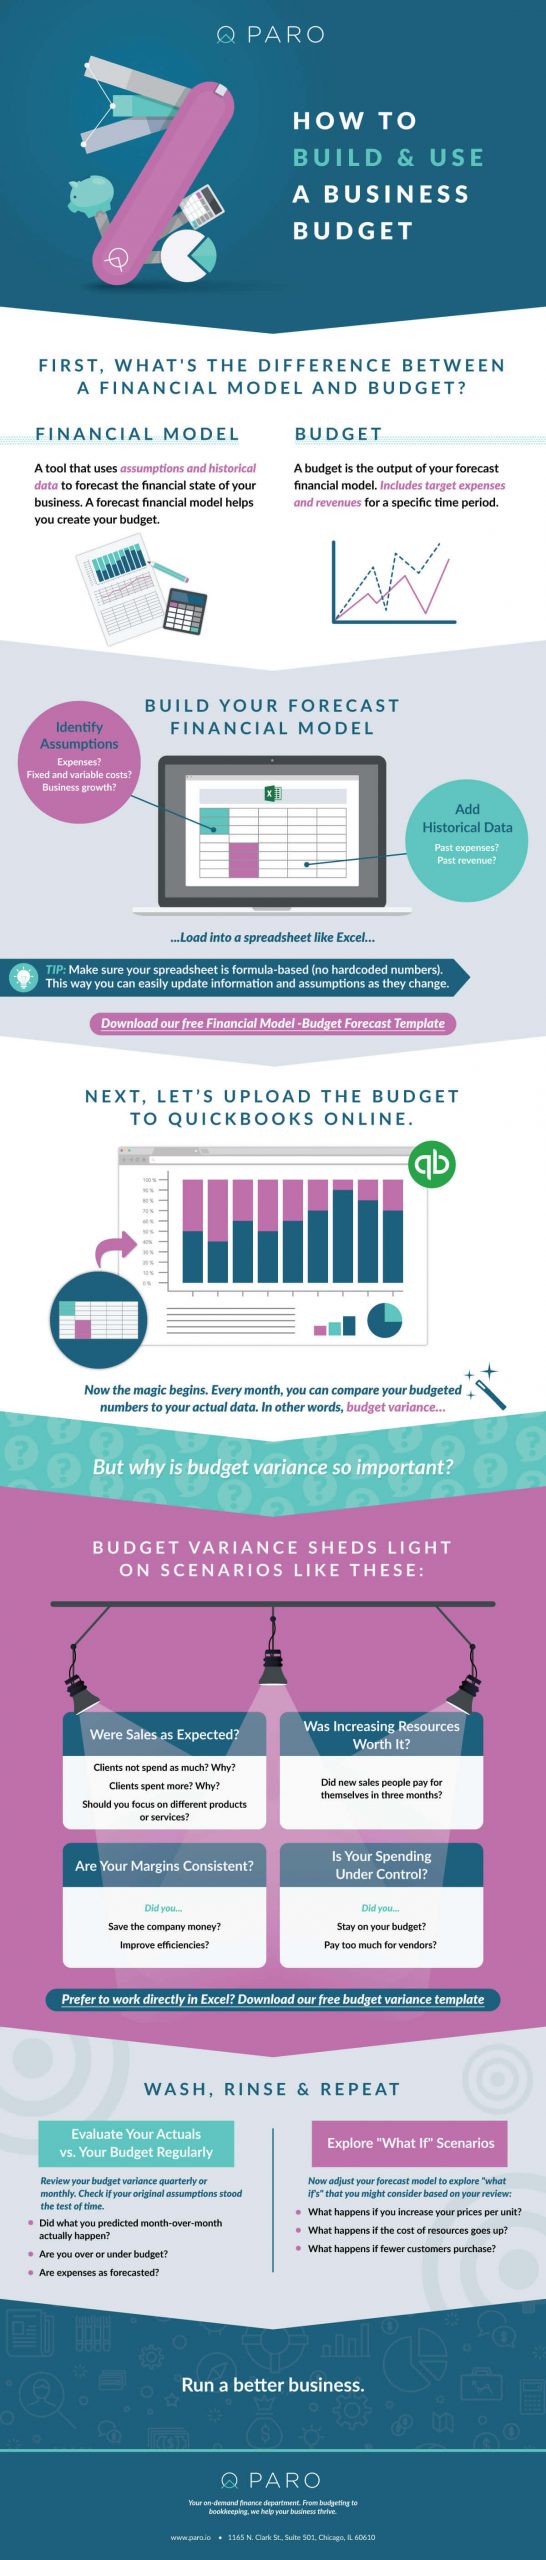 How to Build and Use a Business Budget